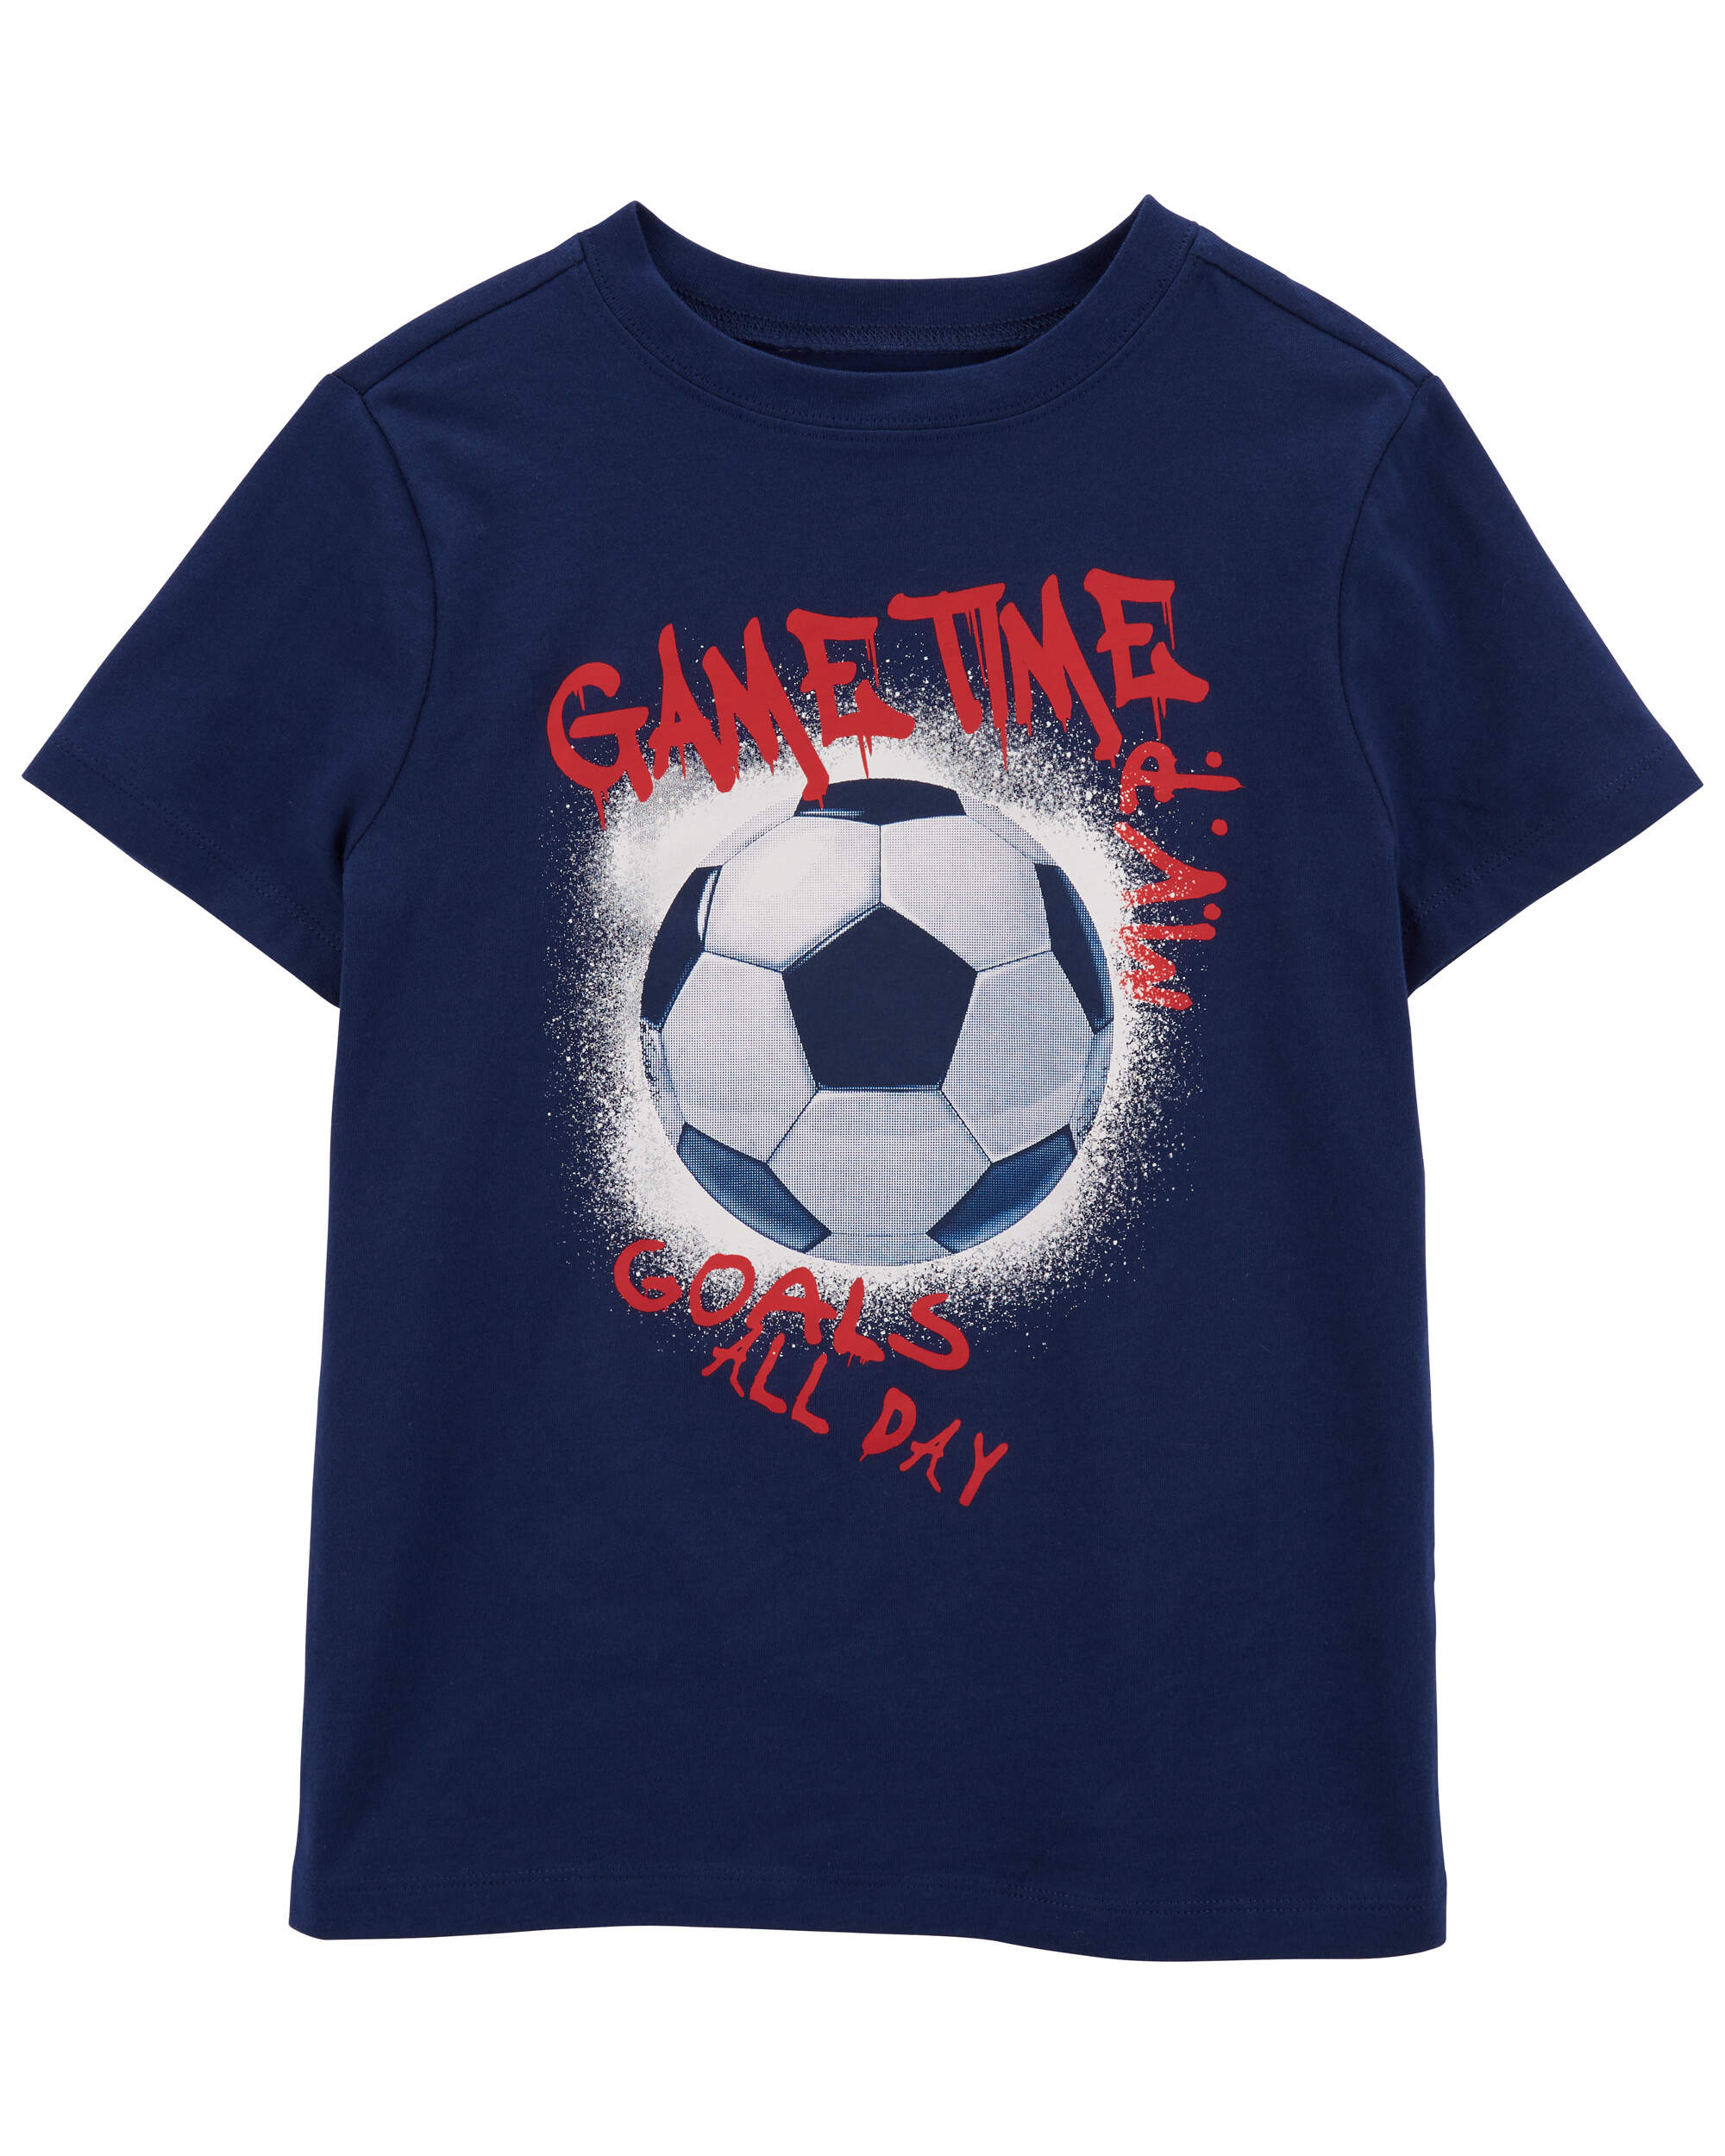 Soccer Graphic Tee